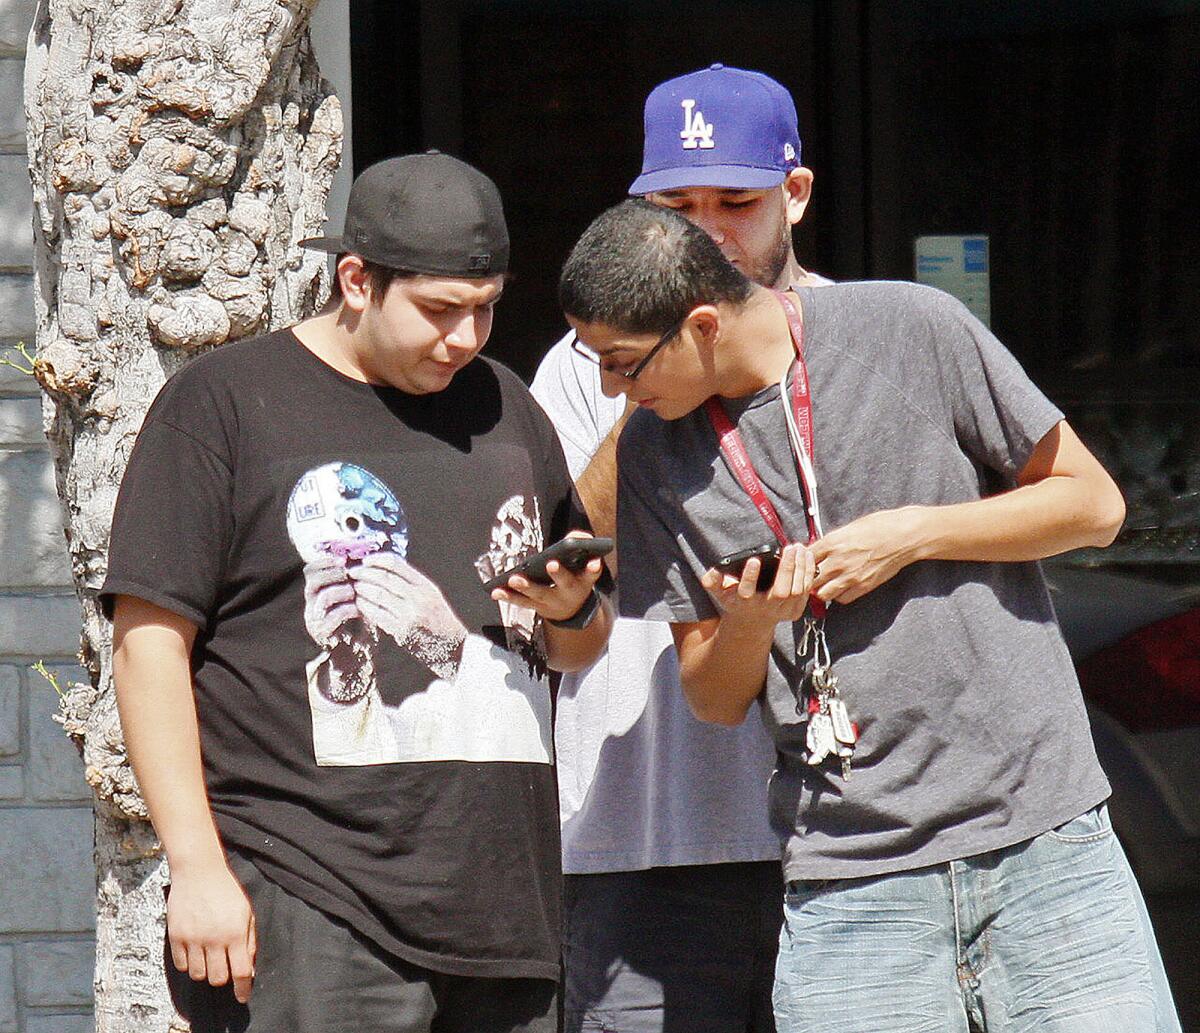 Christian Perez, Marcus Morales, and Oscar Sanchez, of Glendale, check out their cellphones looking for Pokemon Go landmarks.